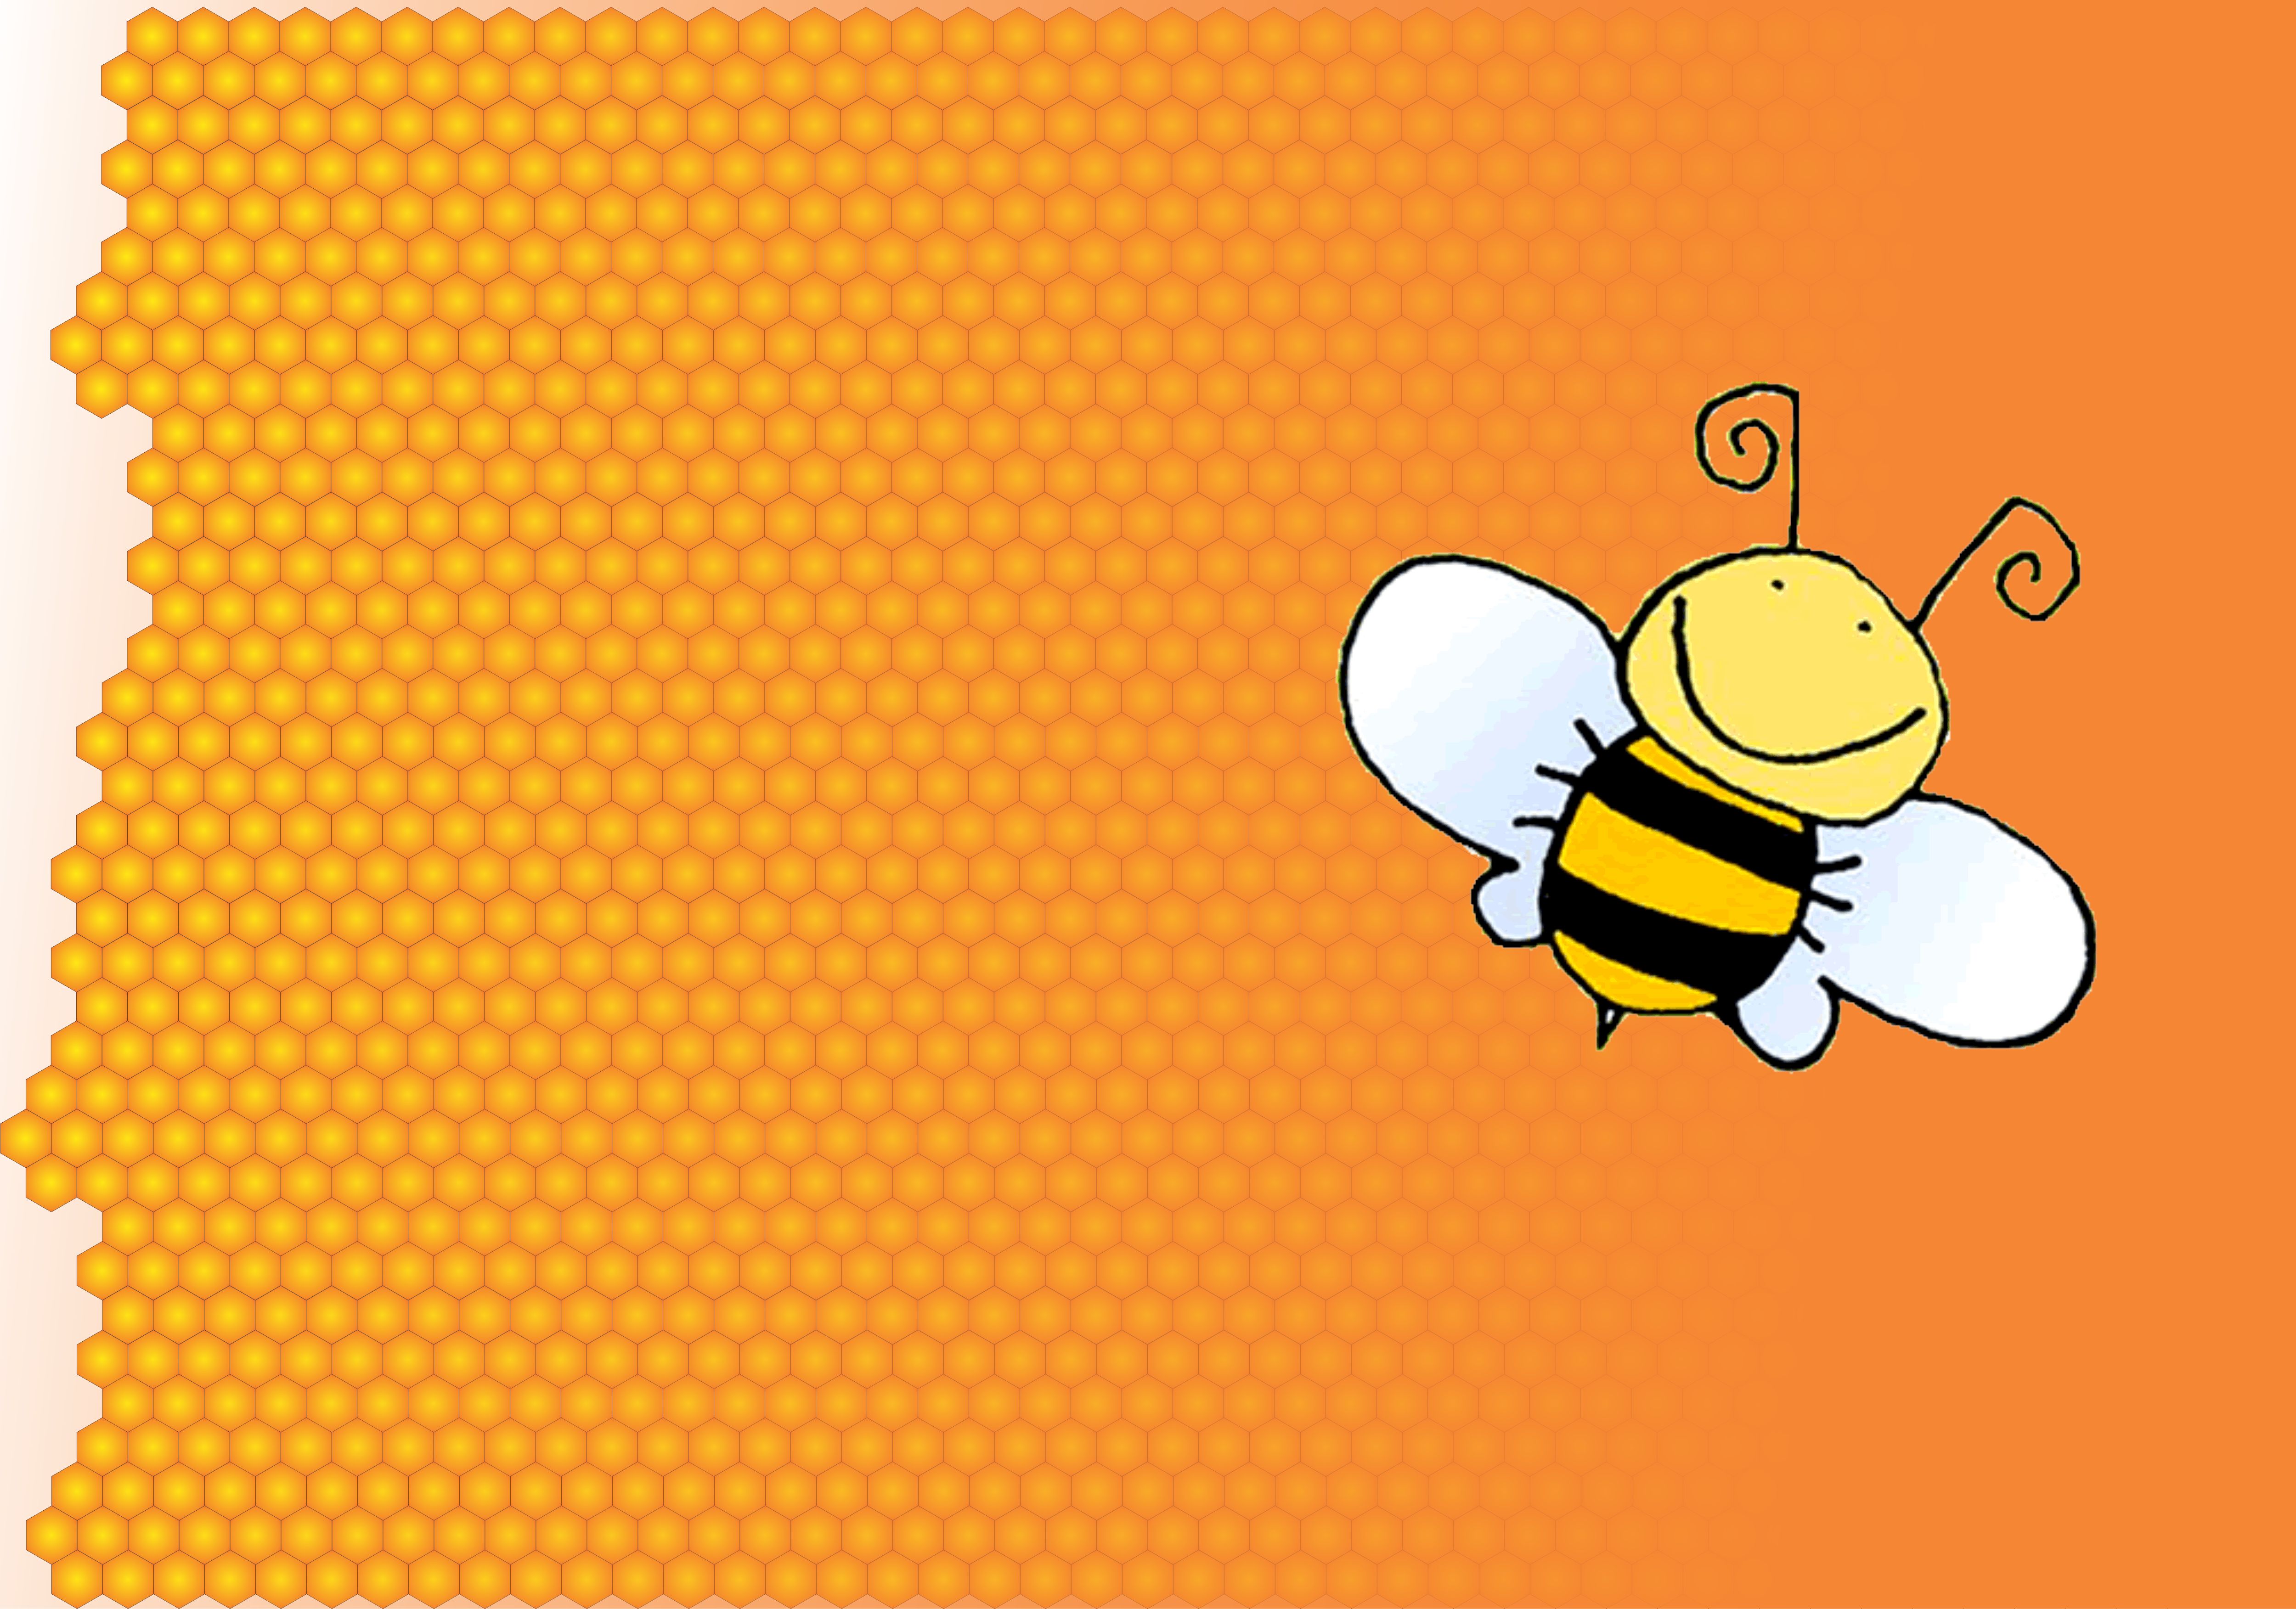 Cute Bumble Bee Wallpaper Grey Background Cute Wallpaper Bumble Bee  Background Image And Wallpaper for Free Download